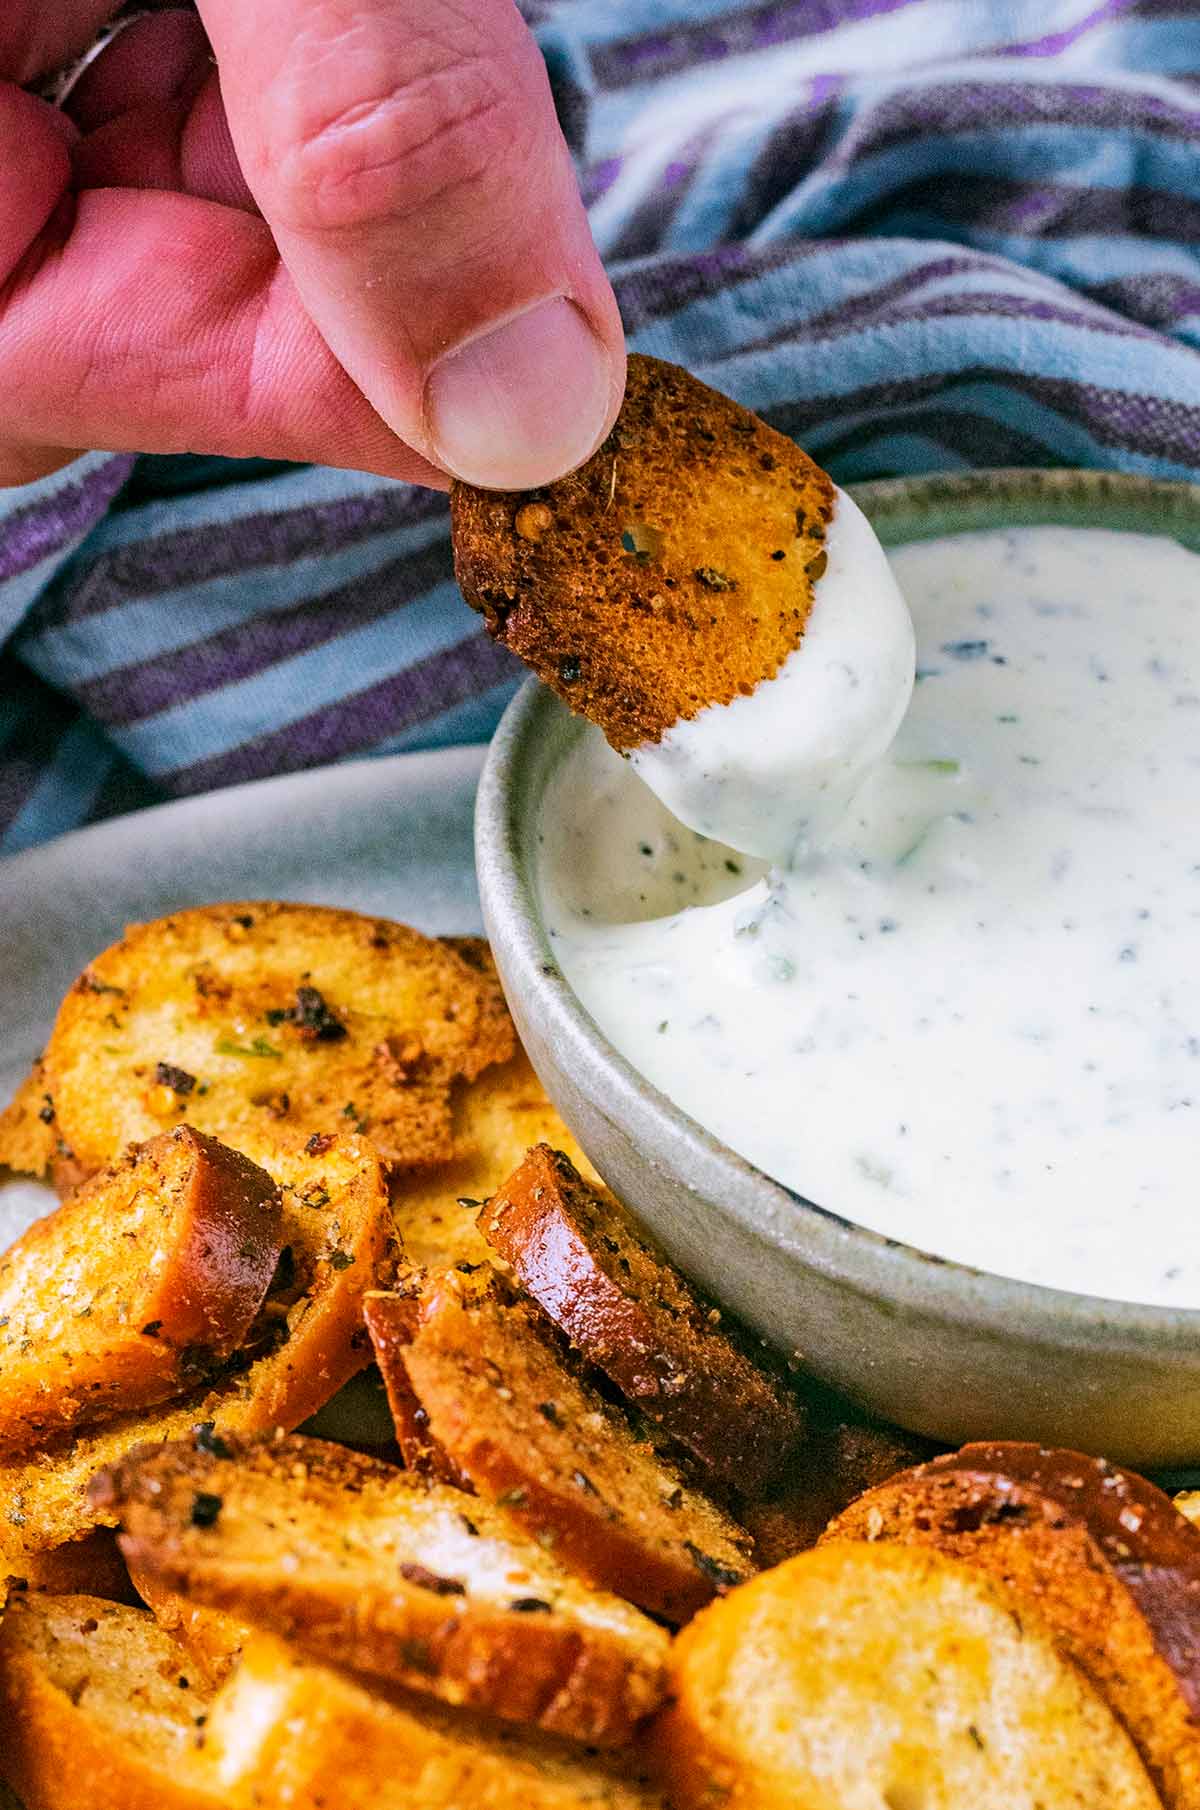 A hand dipping a bagel crisp into some creamy dip.